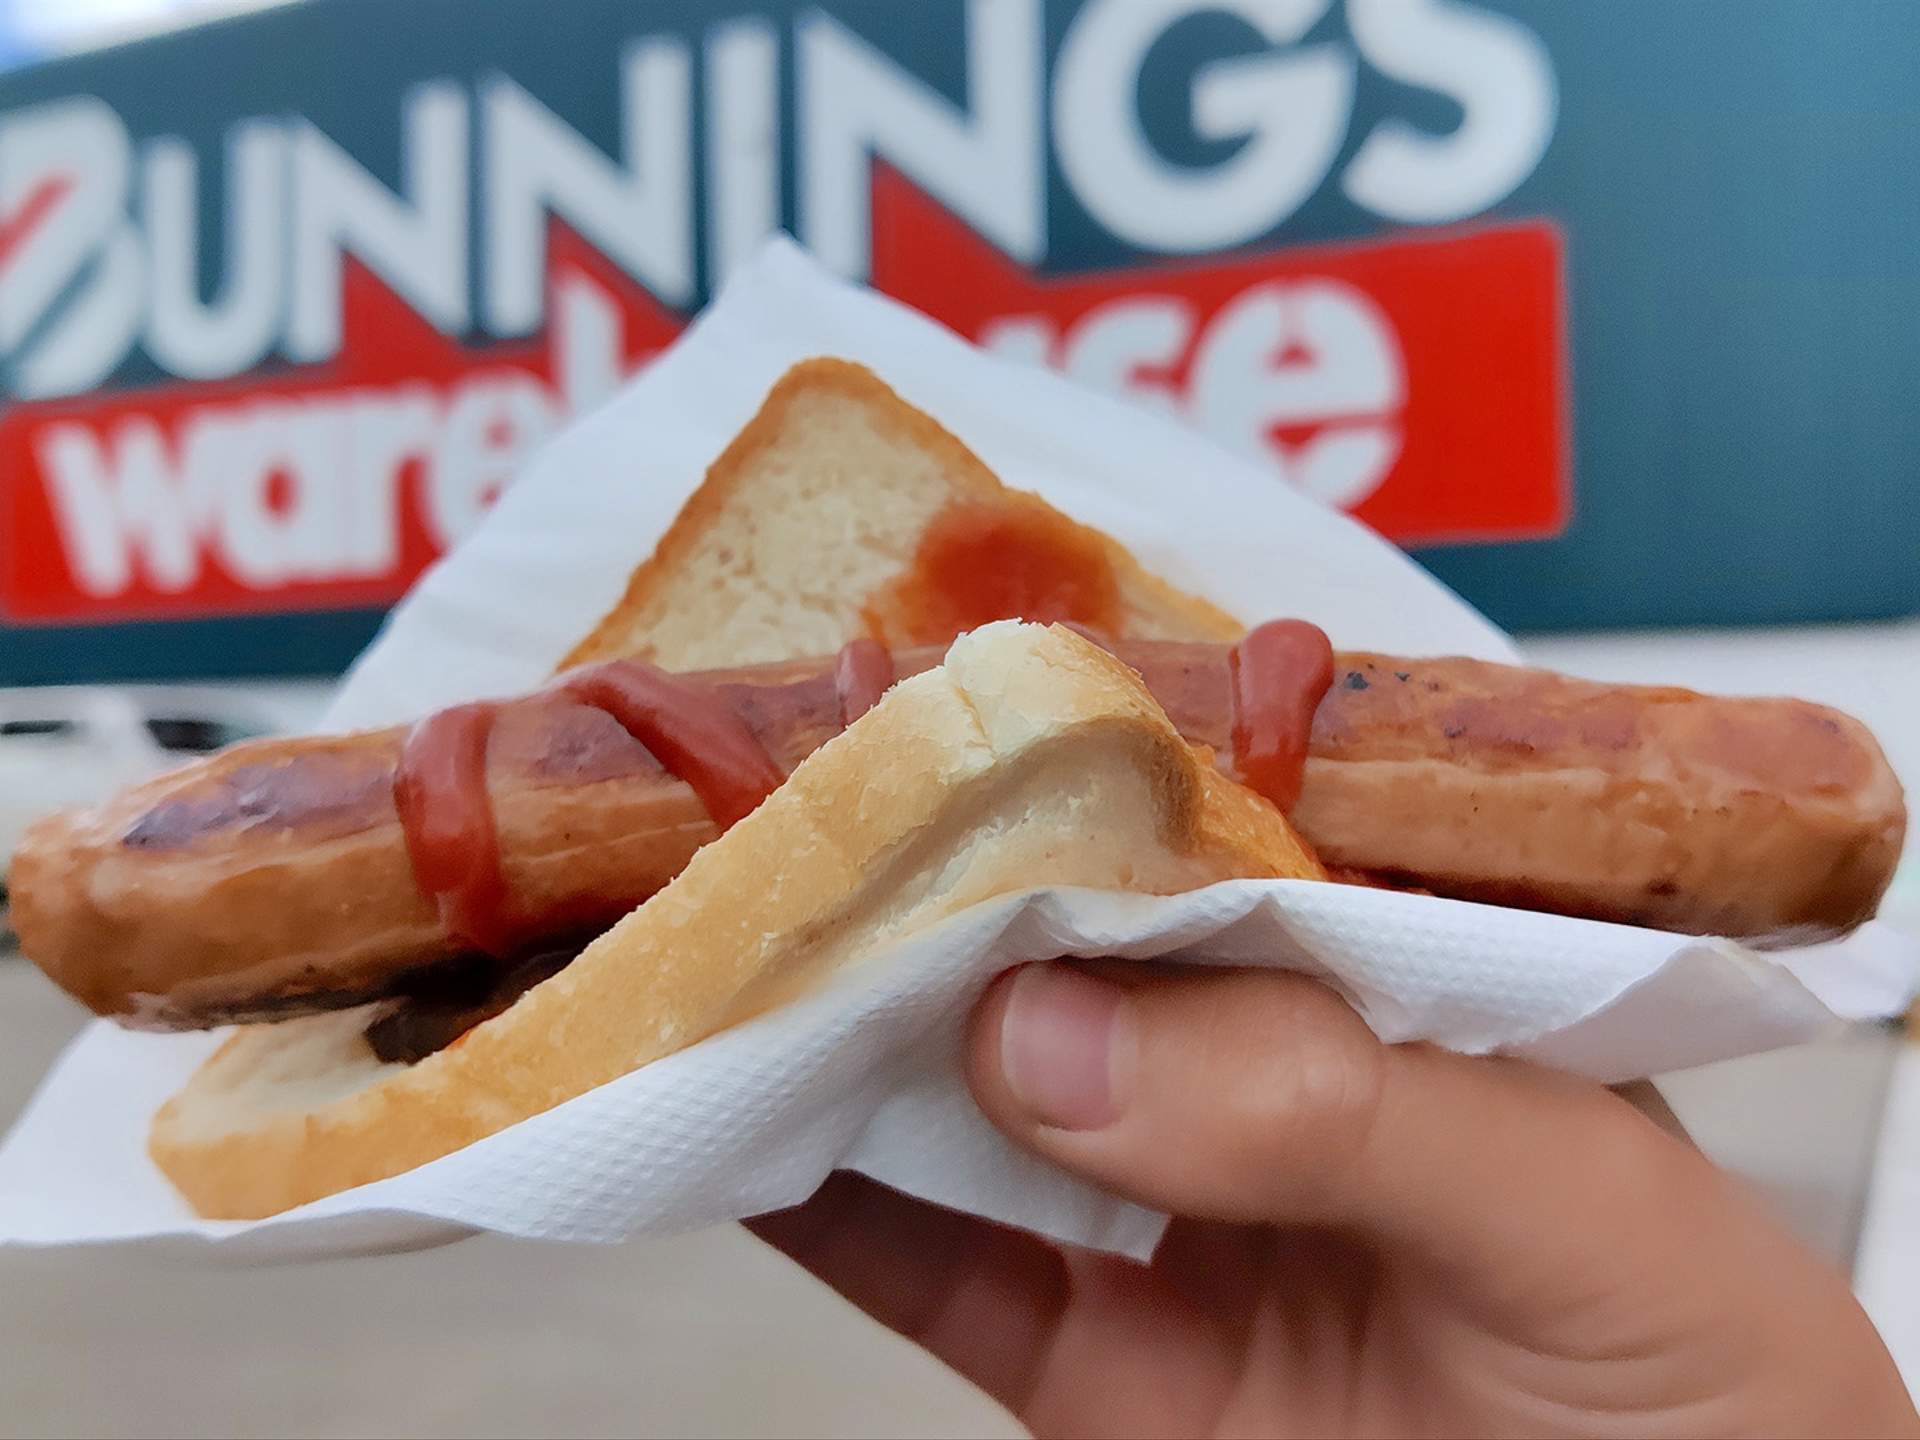 And all was right with the world once again!! First Bunnings snag